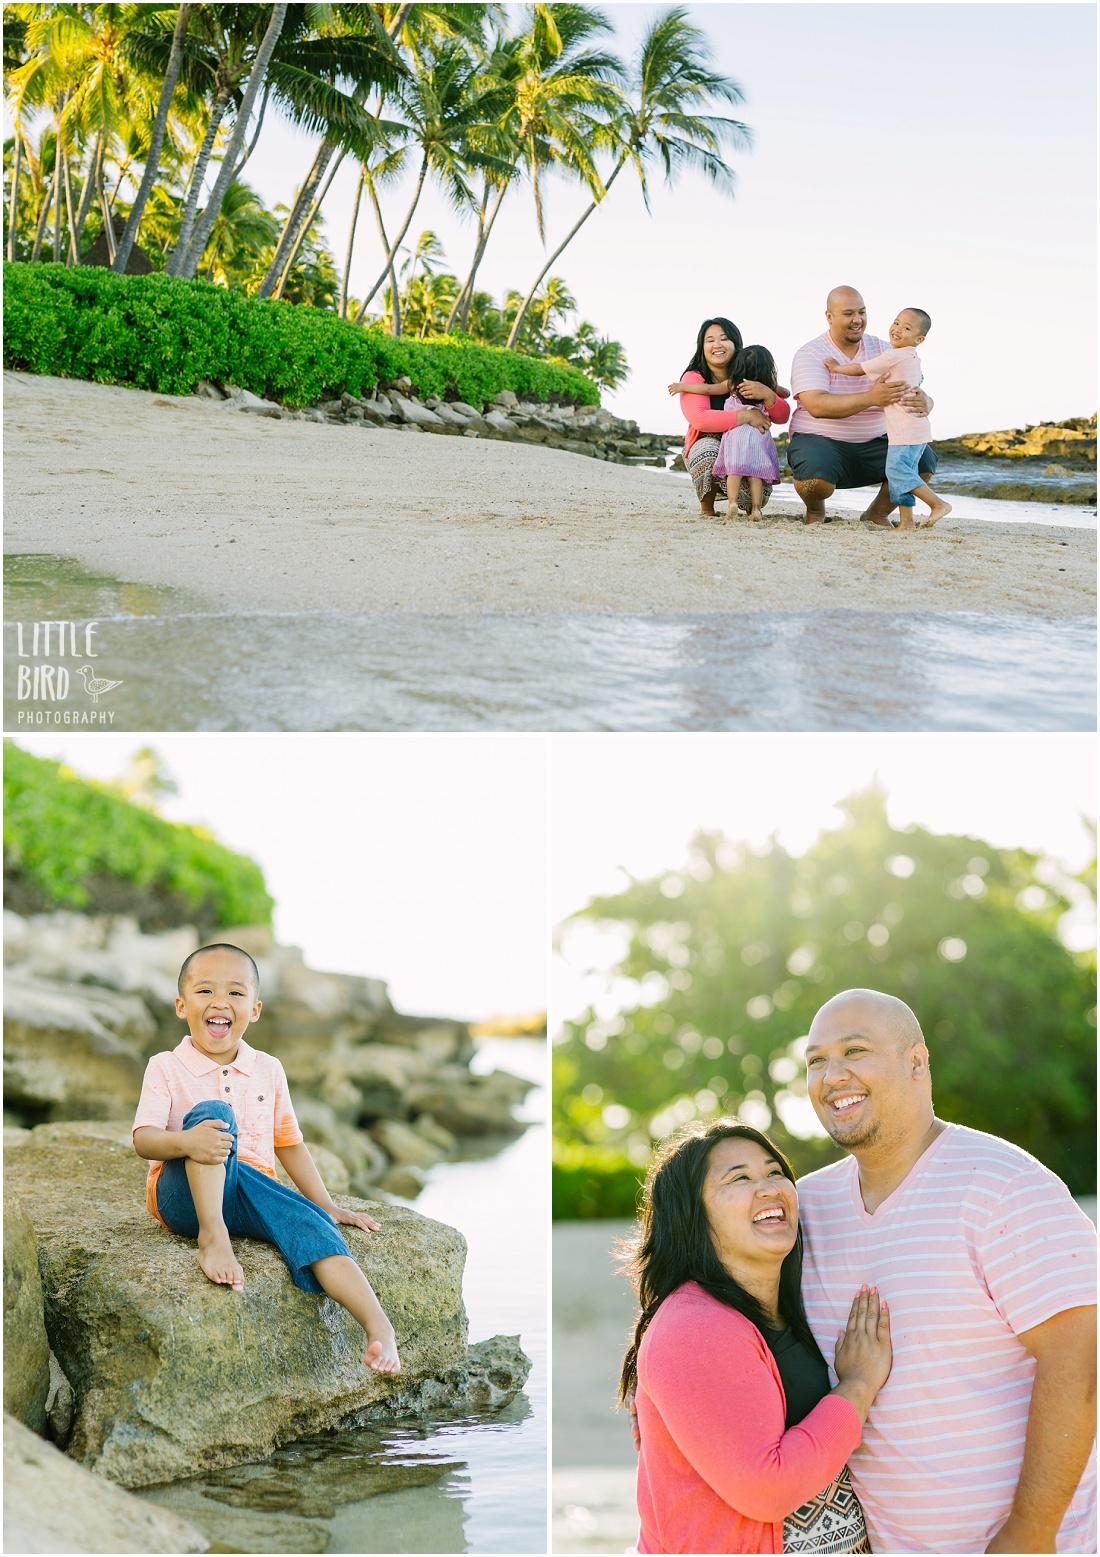 sweet family photography at the beach in hawaii